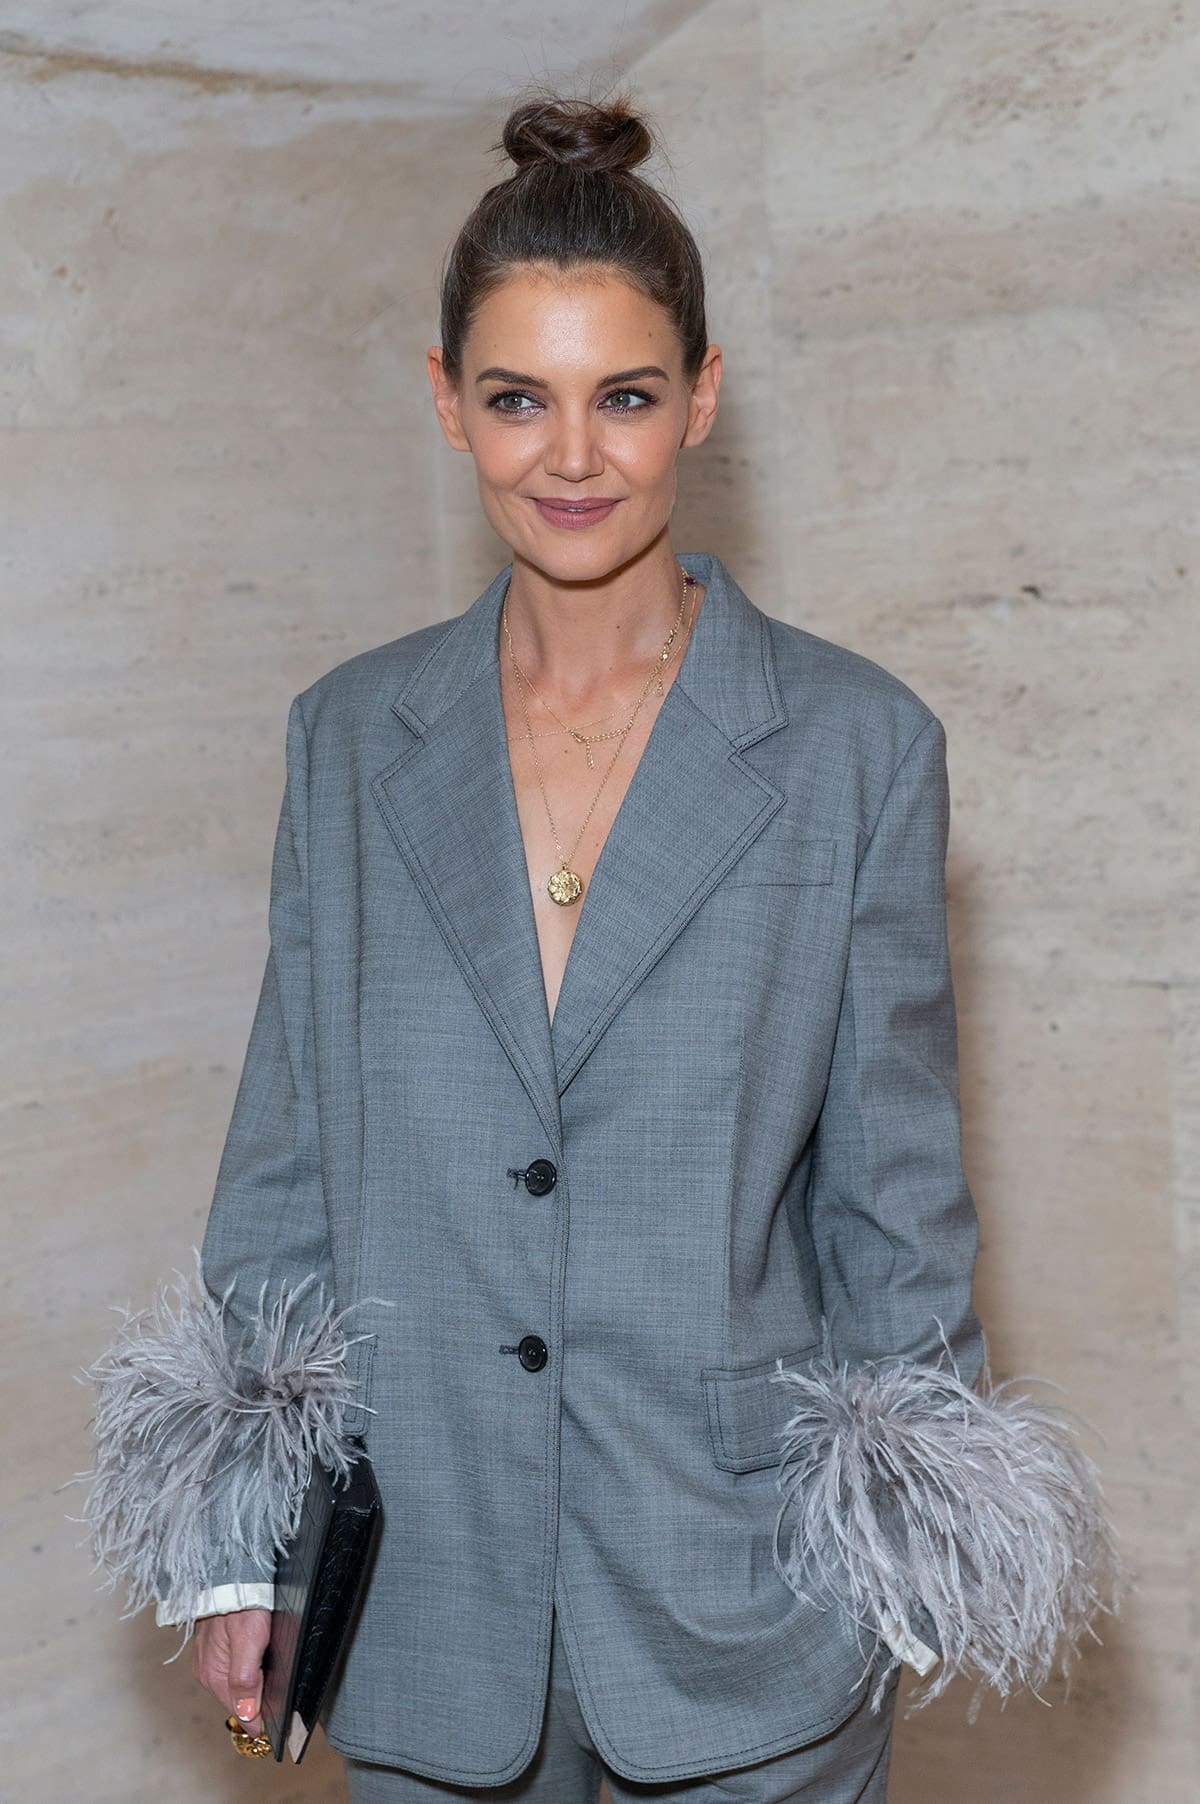 Katie Holmes Gives Her Opinion On A Dawson's Creek Reboot